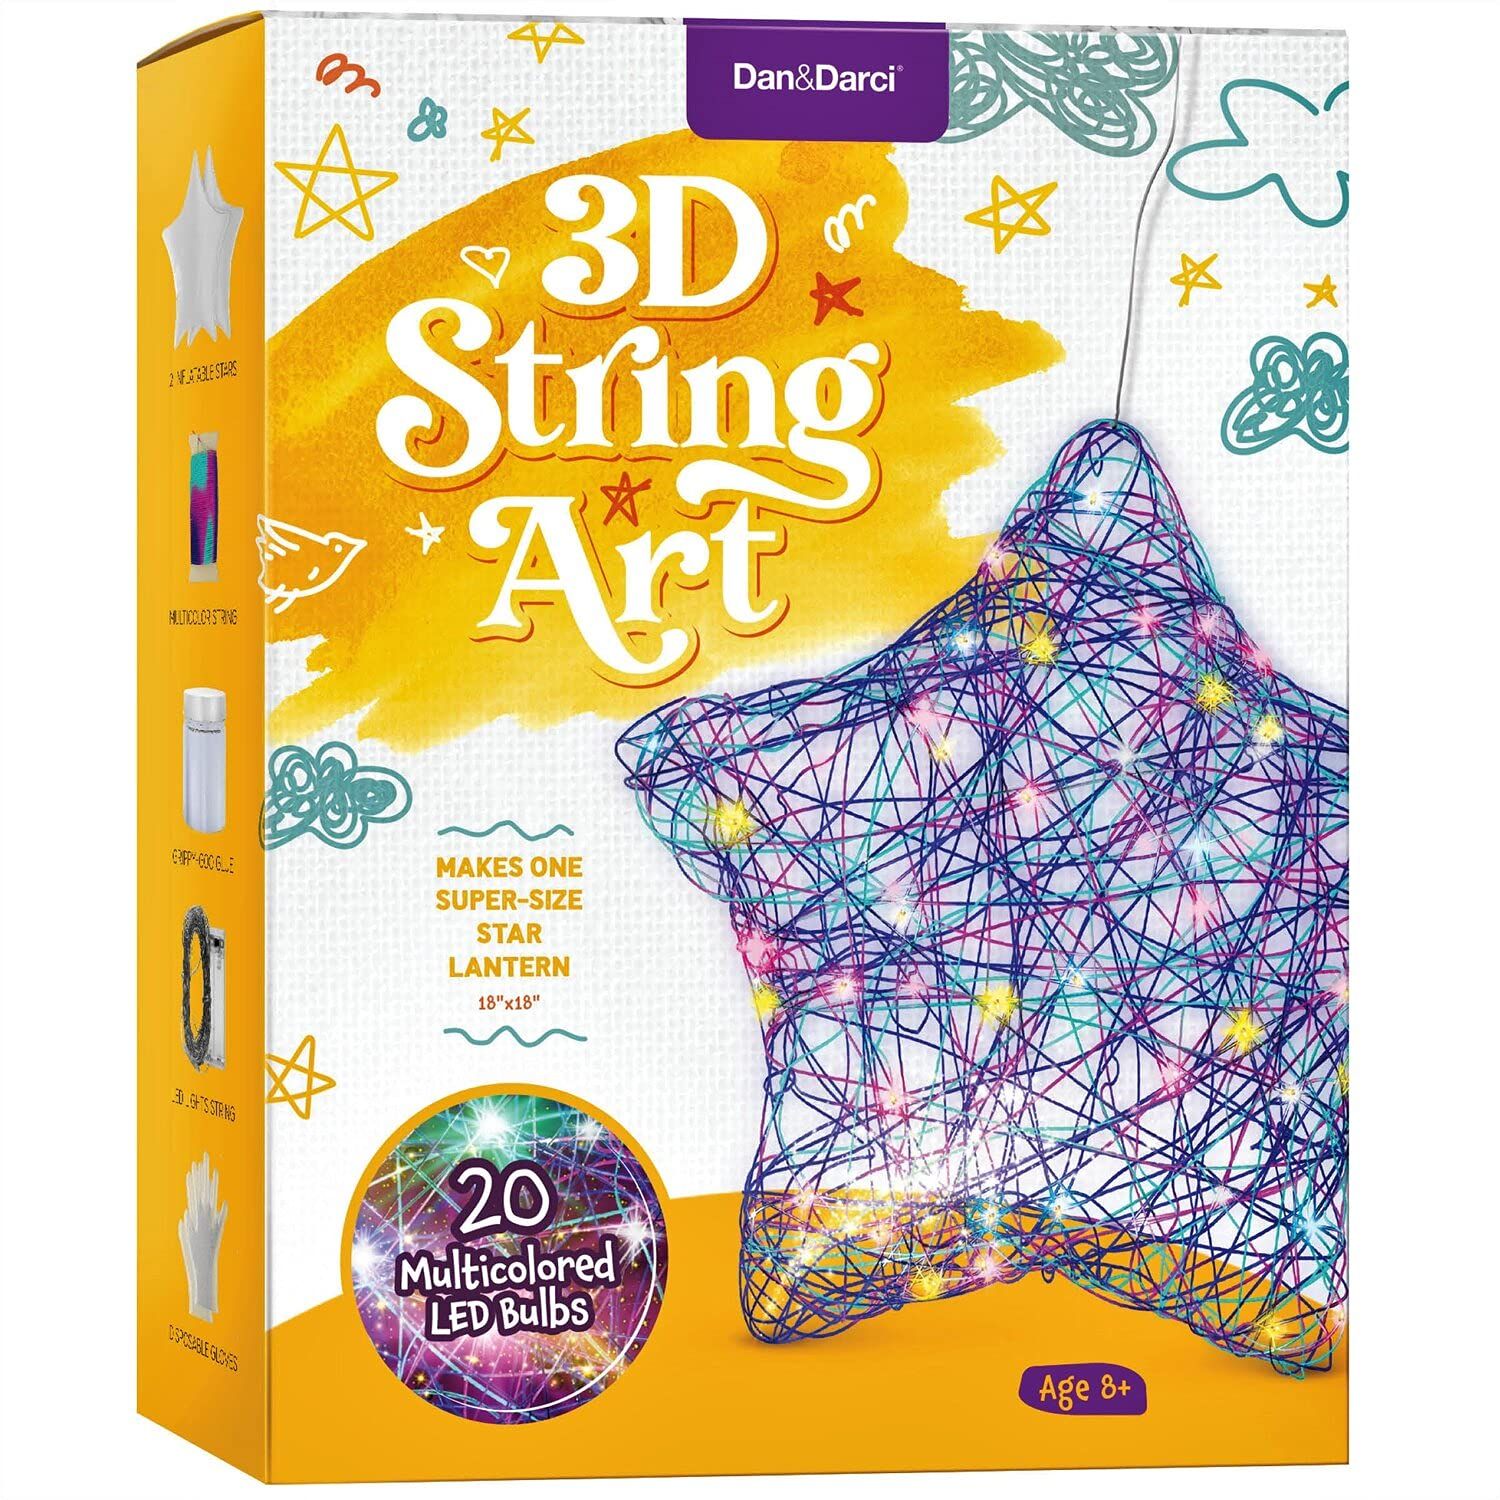 3D String Art Kit for Kids - Makes a Light-Up Star Lantern with 20 Multi-Colored LED Bulbs - Kids... | Amazon (US)